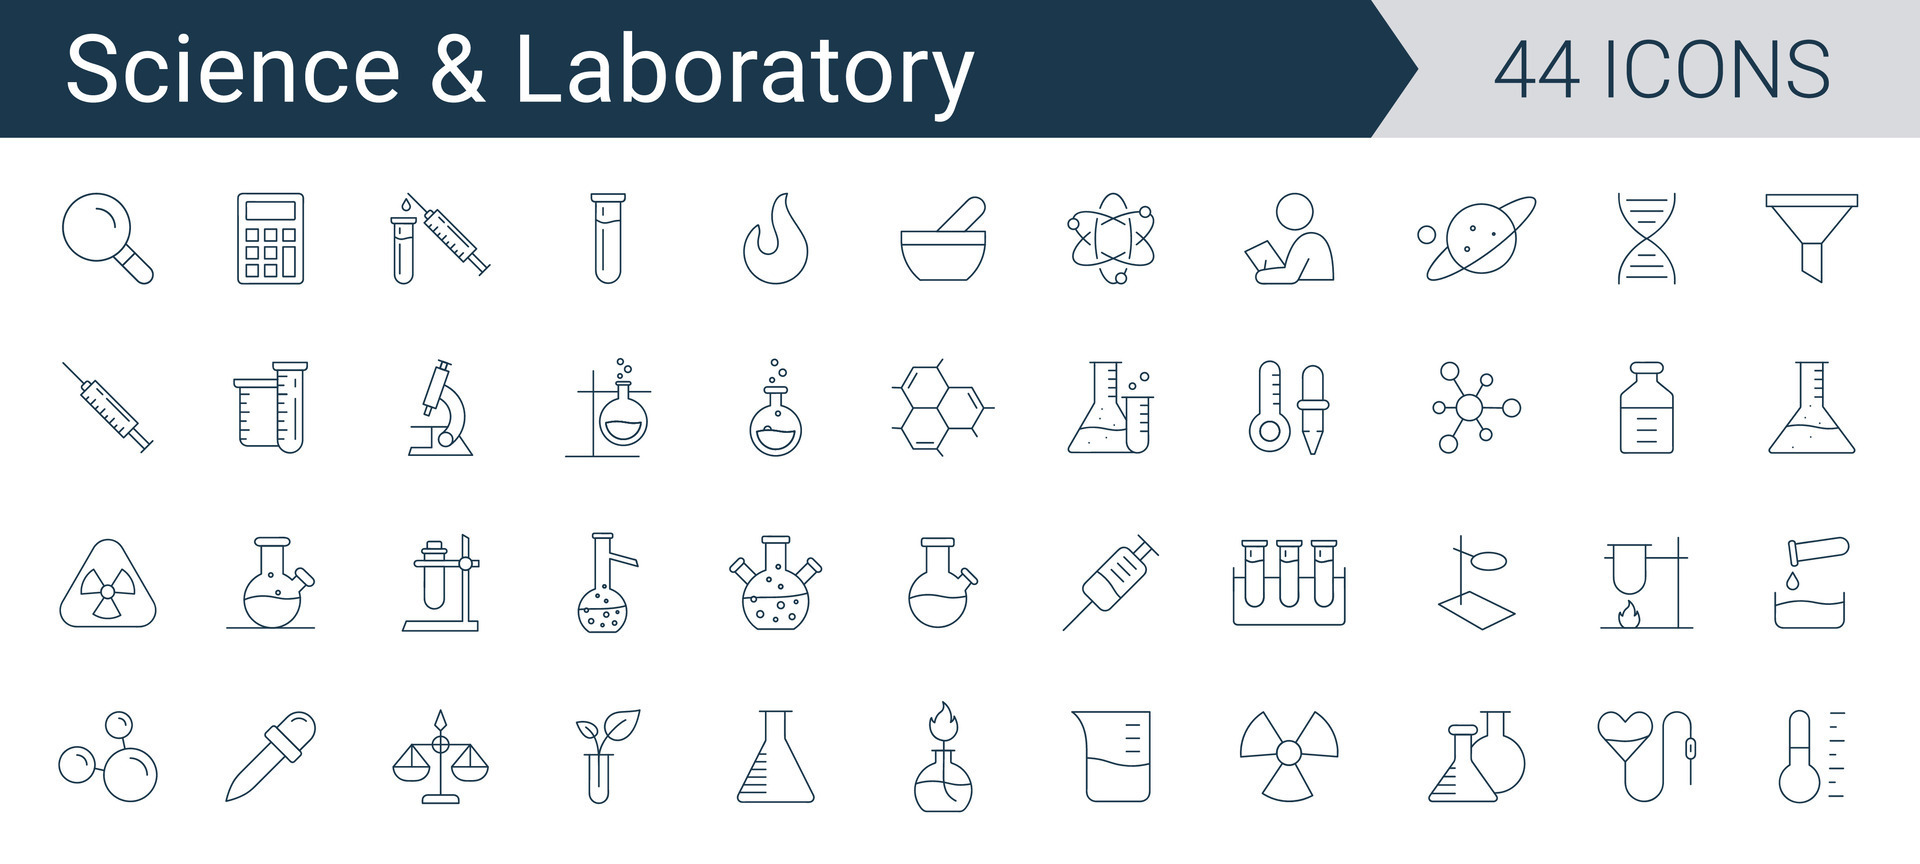 https://static.vecteezy.com/system/resources/previews/026/468/791/original/science-and-laboratory-icon-set-chemistry-and-microbiology-lab-research-glassware-beakers-test-tube-outline-vector.jpg